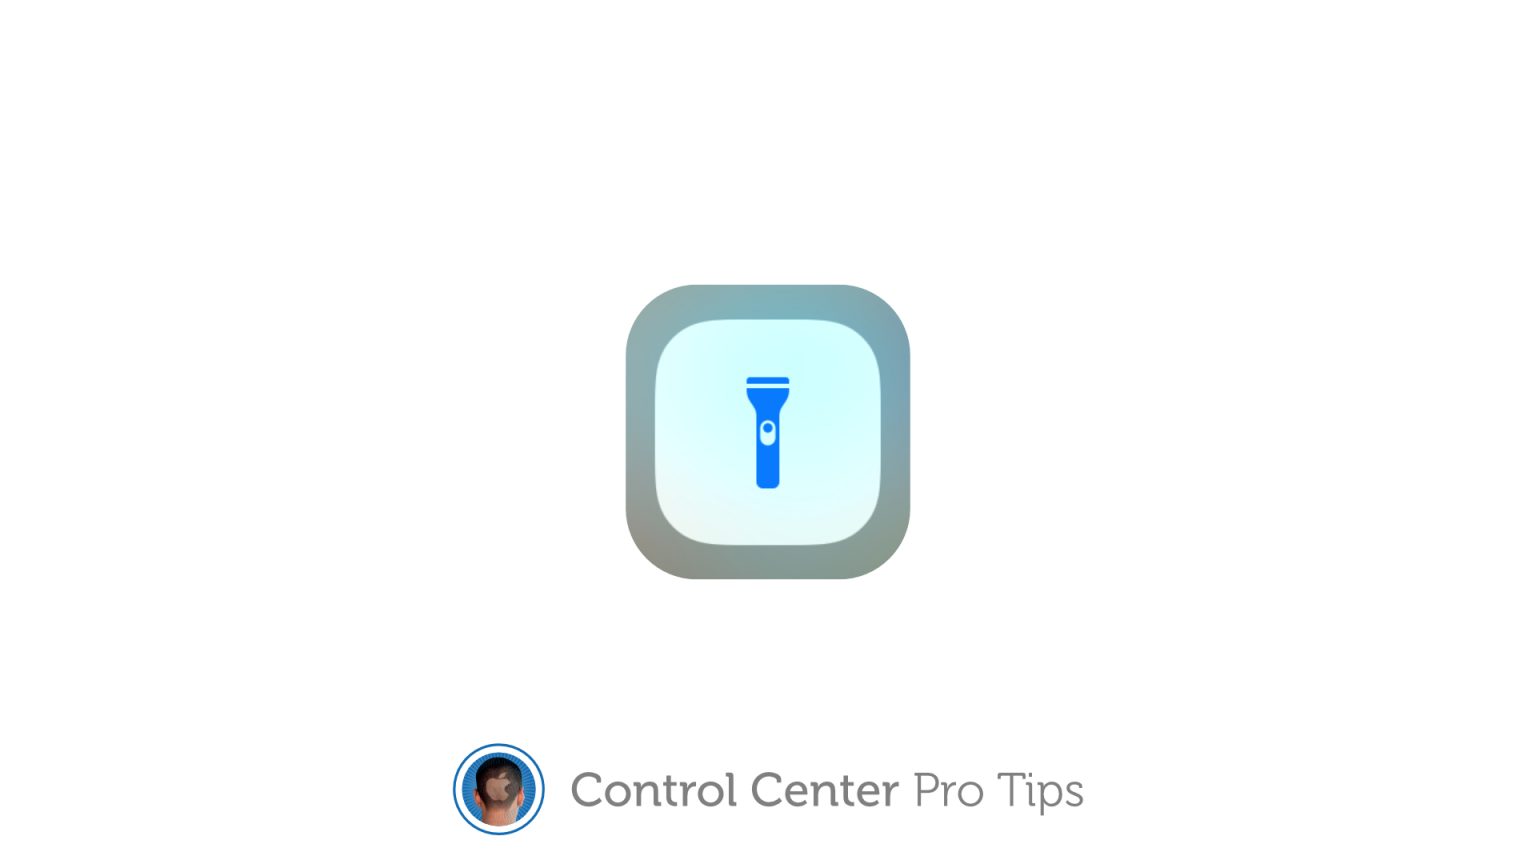 Enable your flashlight inside Control Center